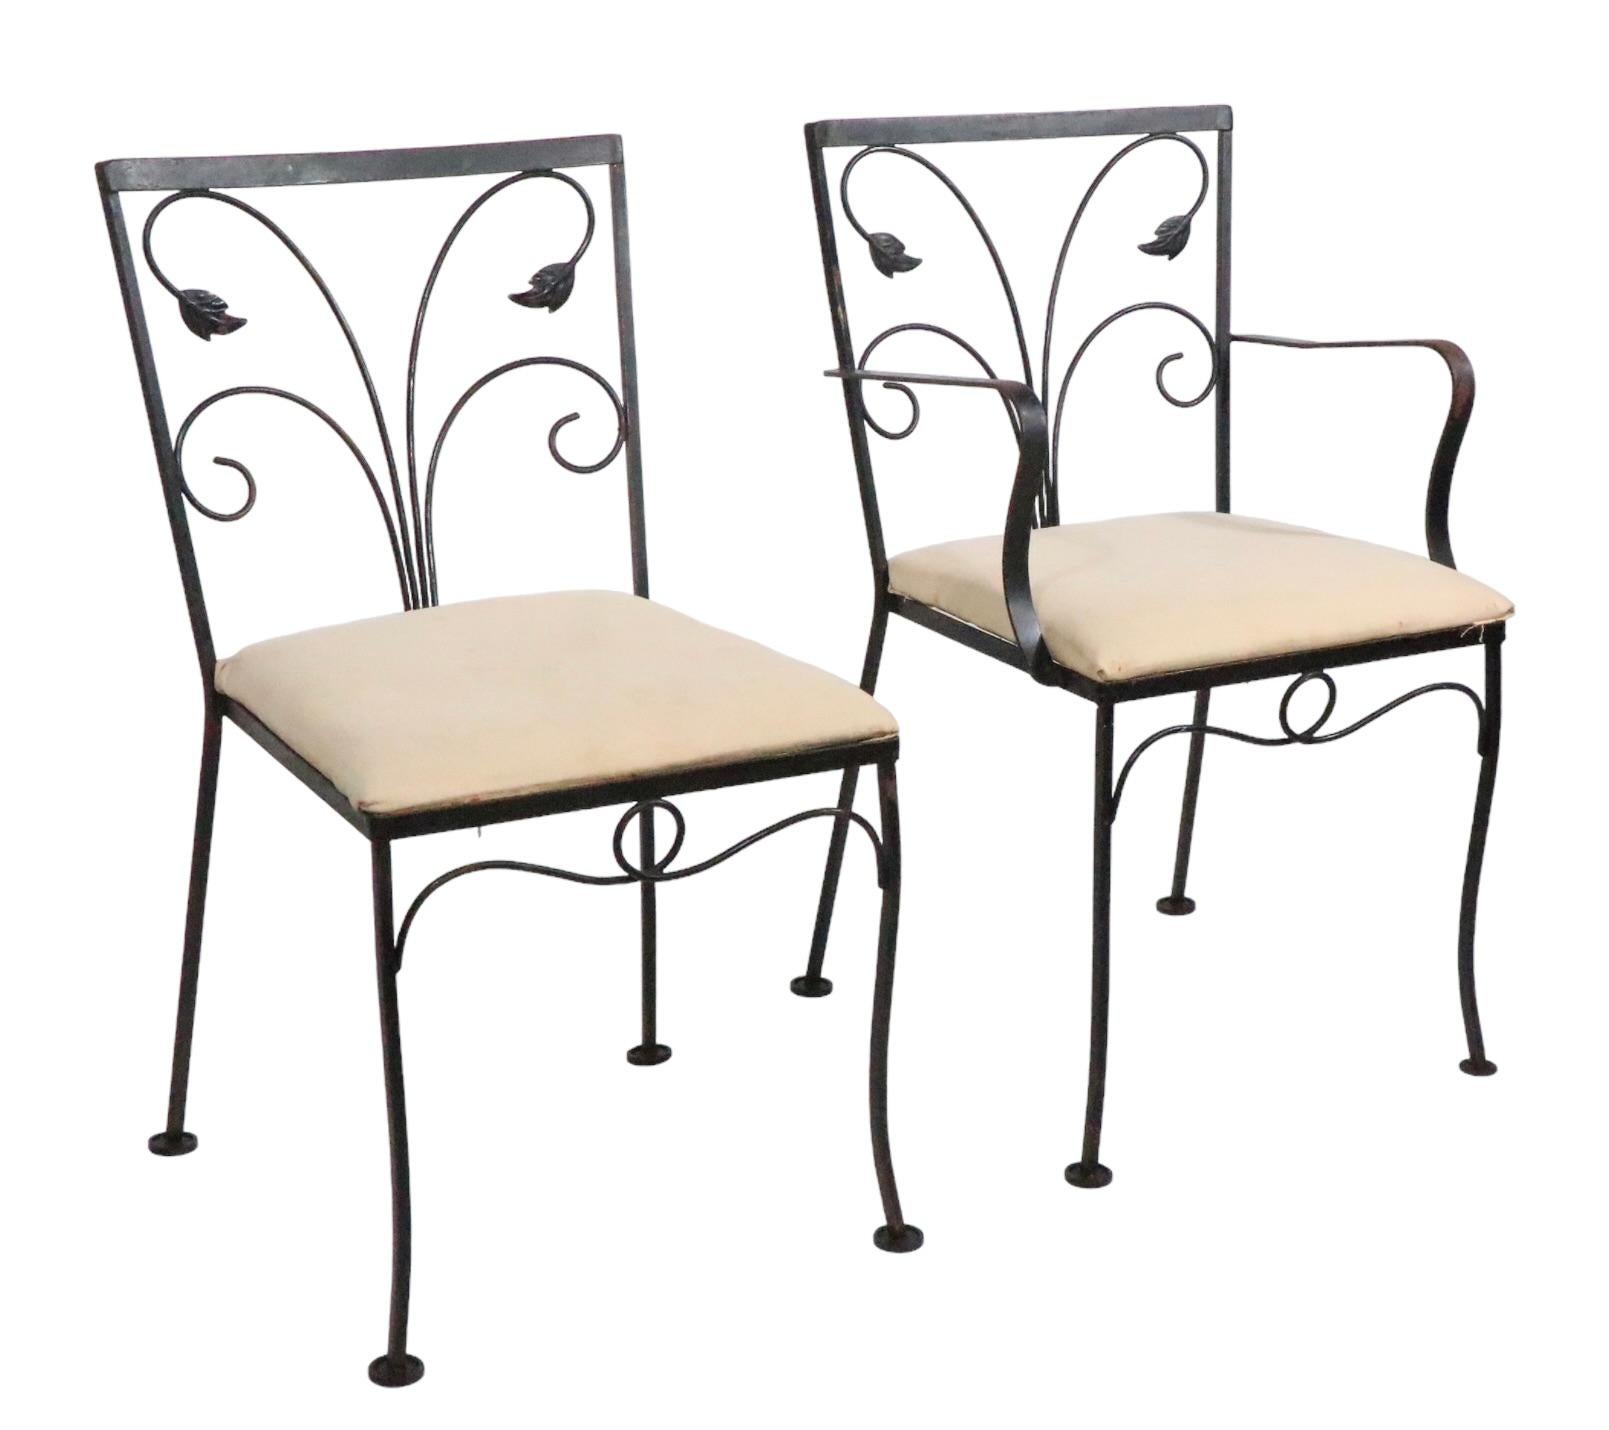 5pc. Wrought Iron and Glass Garden Patio Set att. to Salterini For Sale 11